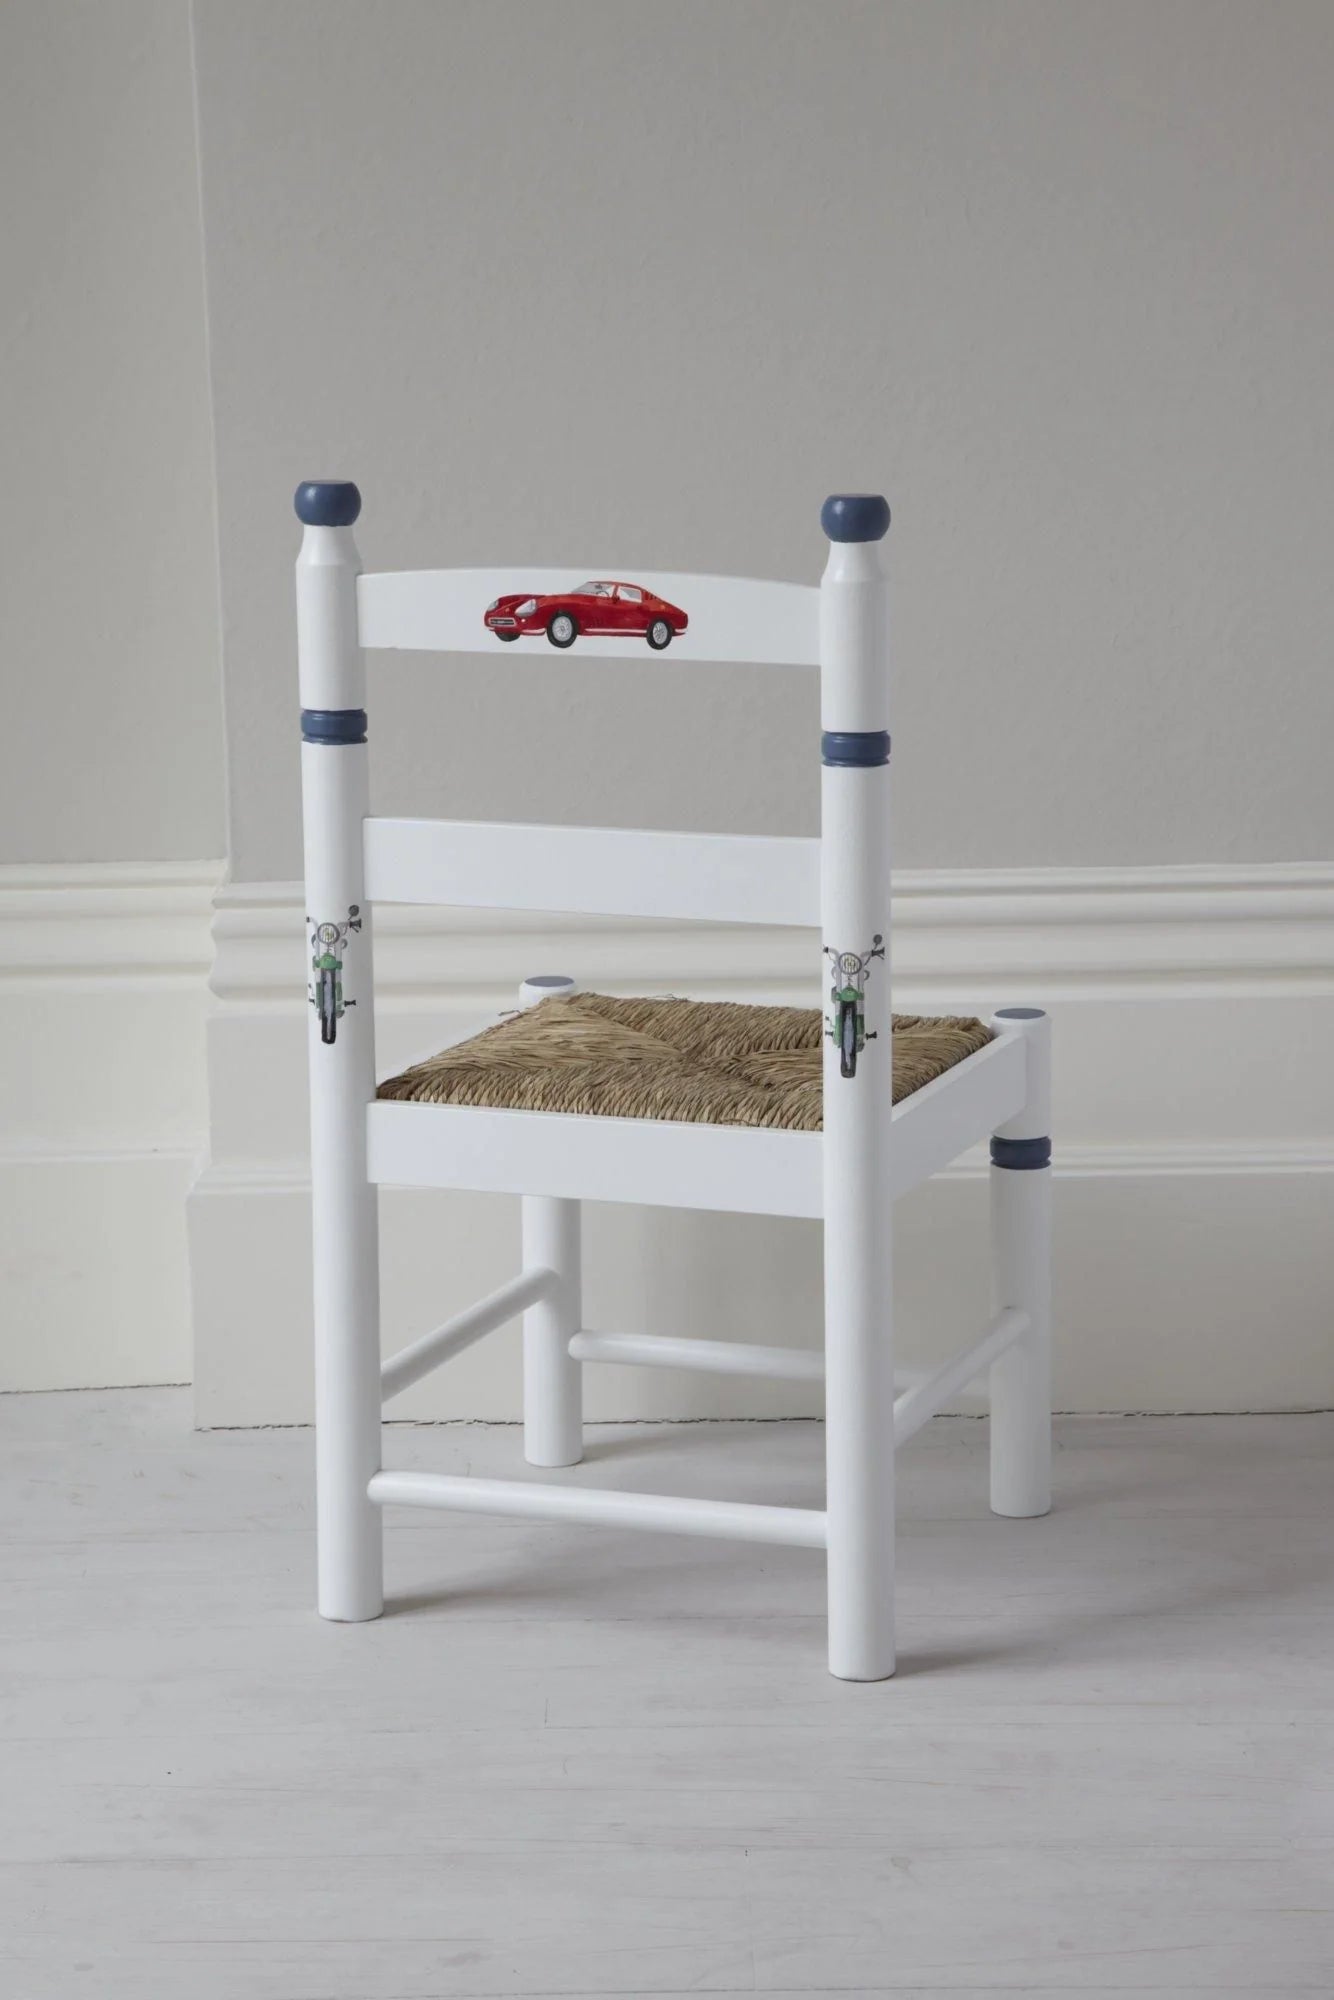 Dragons Rush Seated Chair - Vintage Transport with Vintage Blue Trim